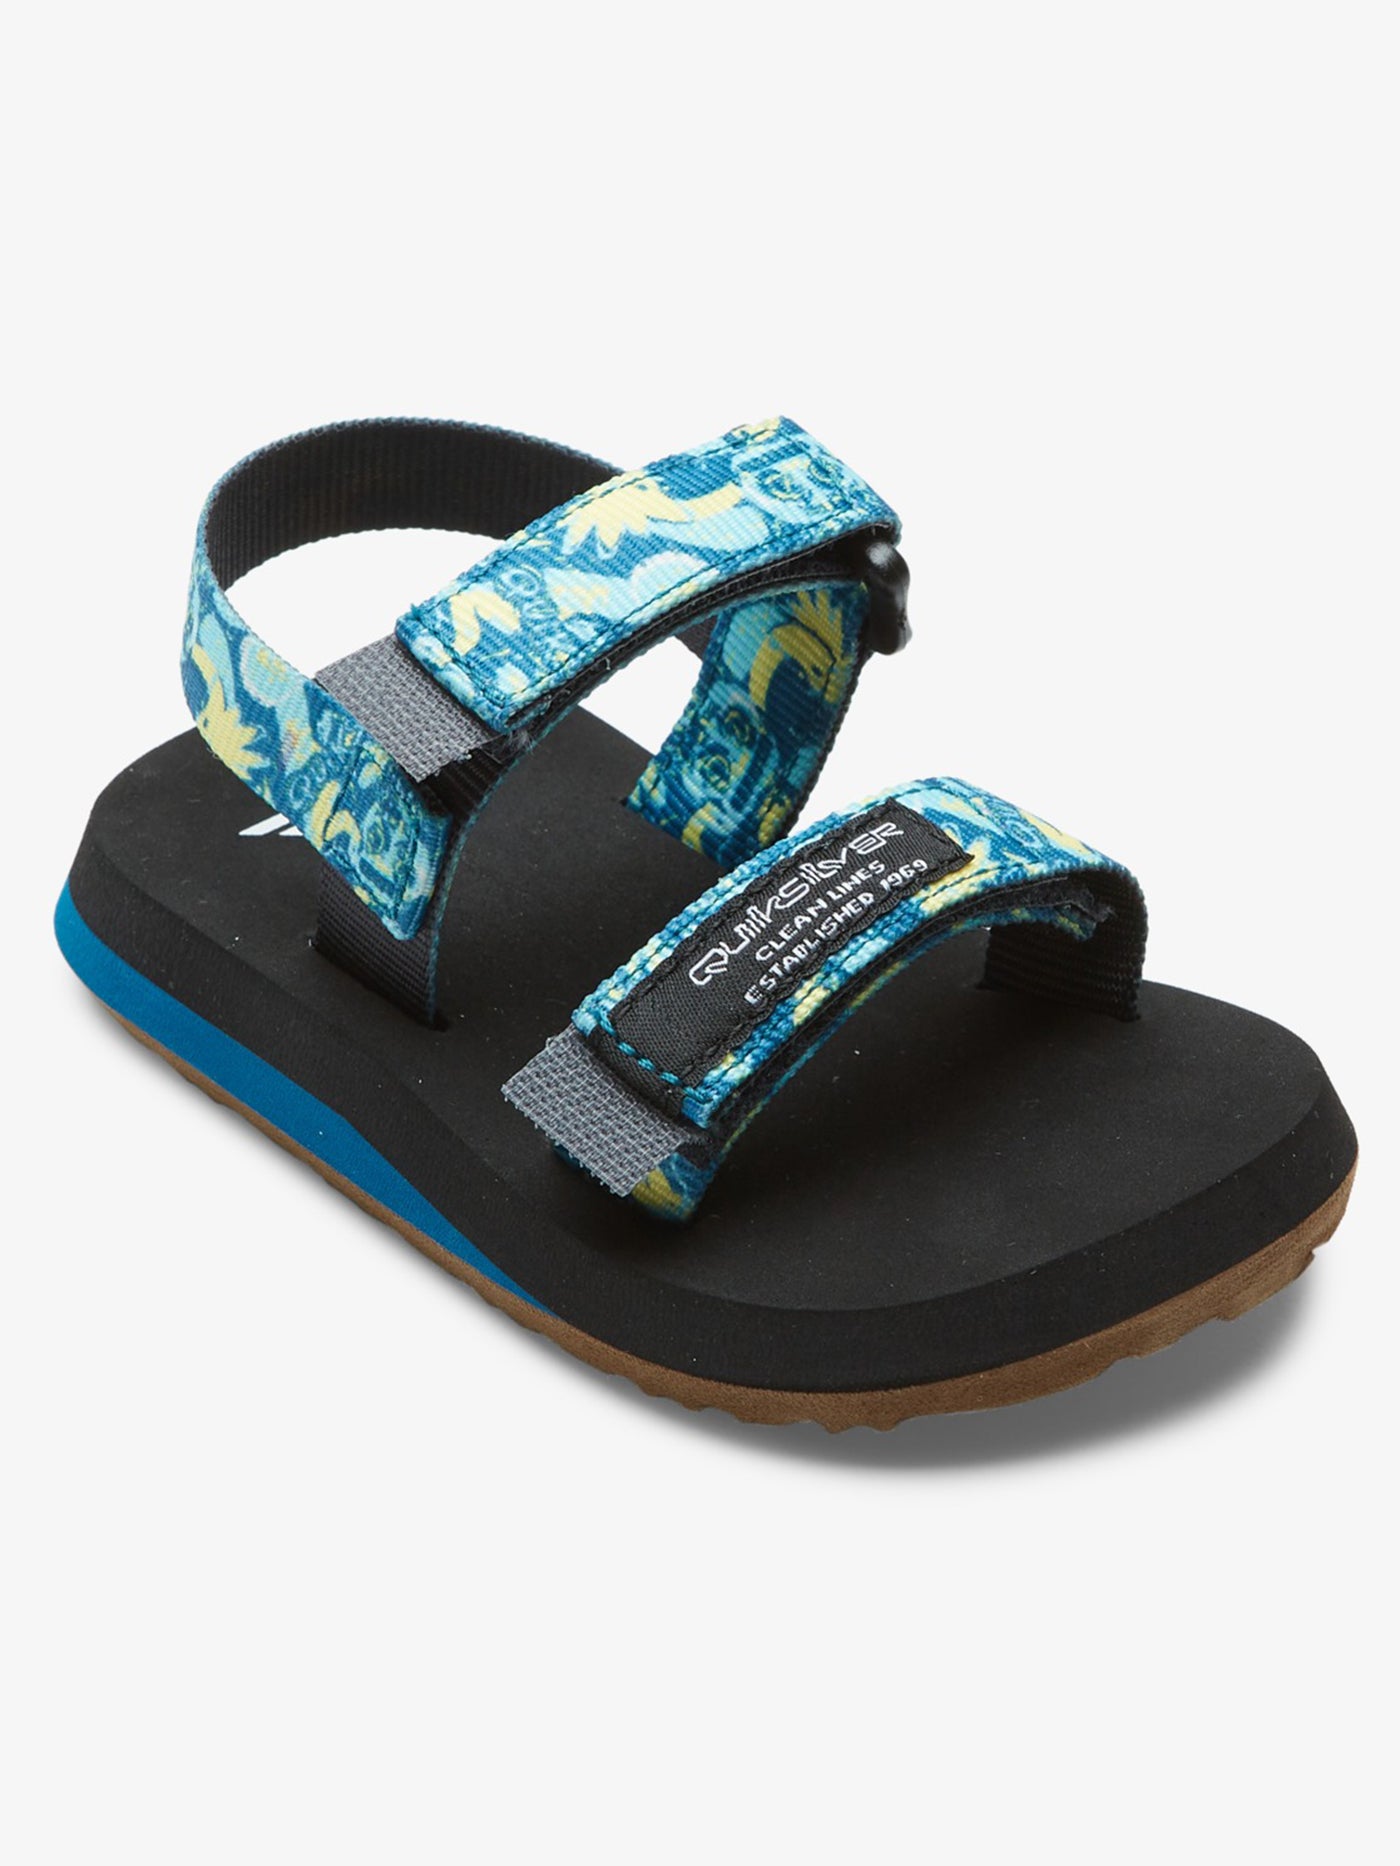 Quiksilver Spring 2023 Monkey Caged Blue/Blue/Yellow Sandals